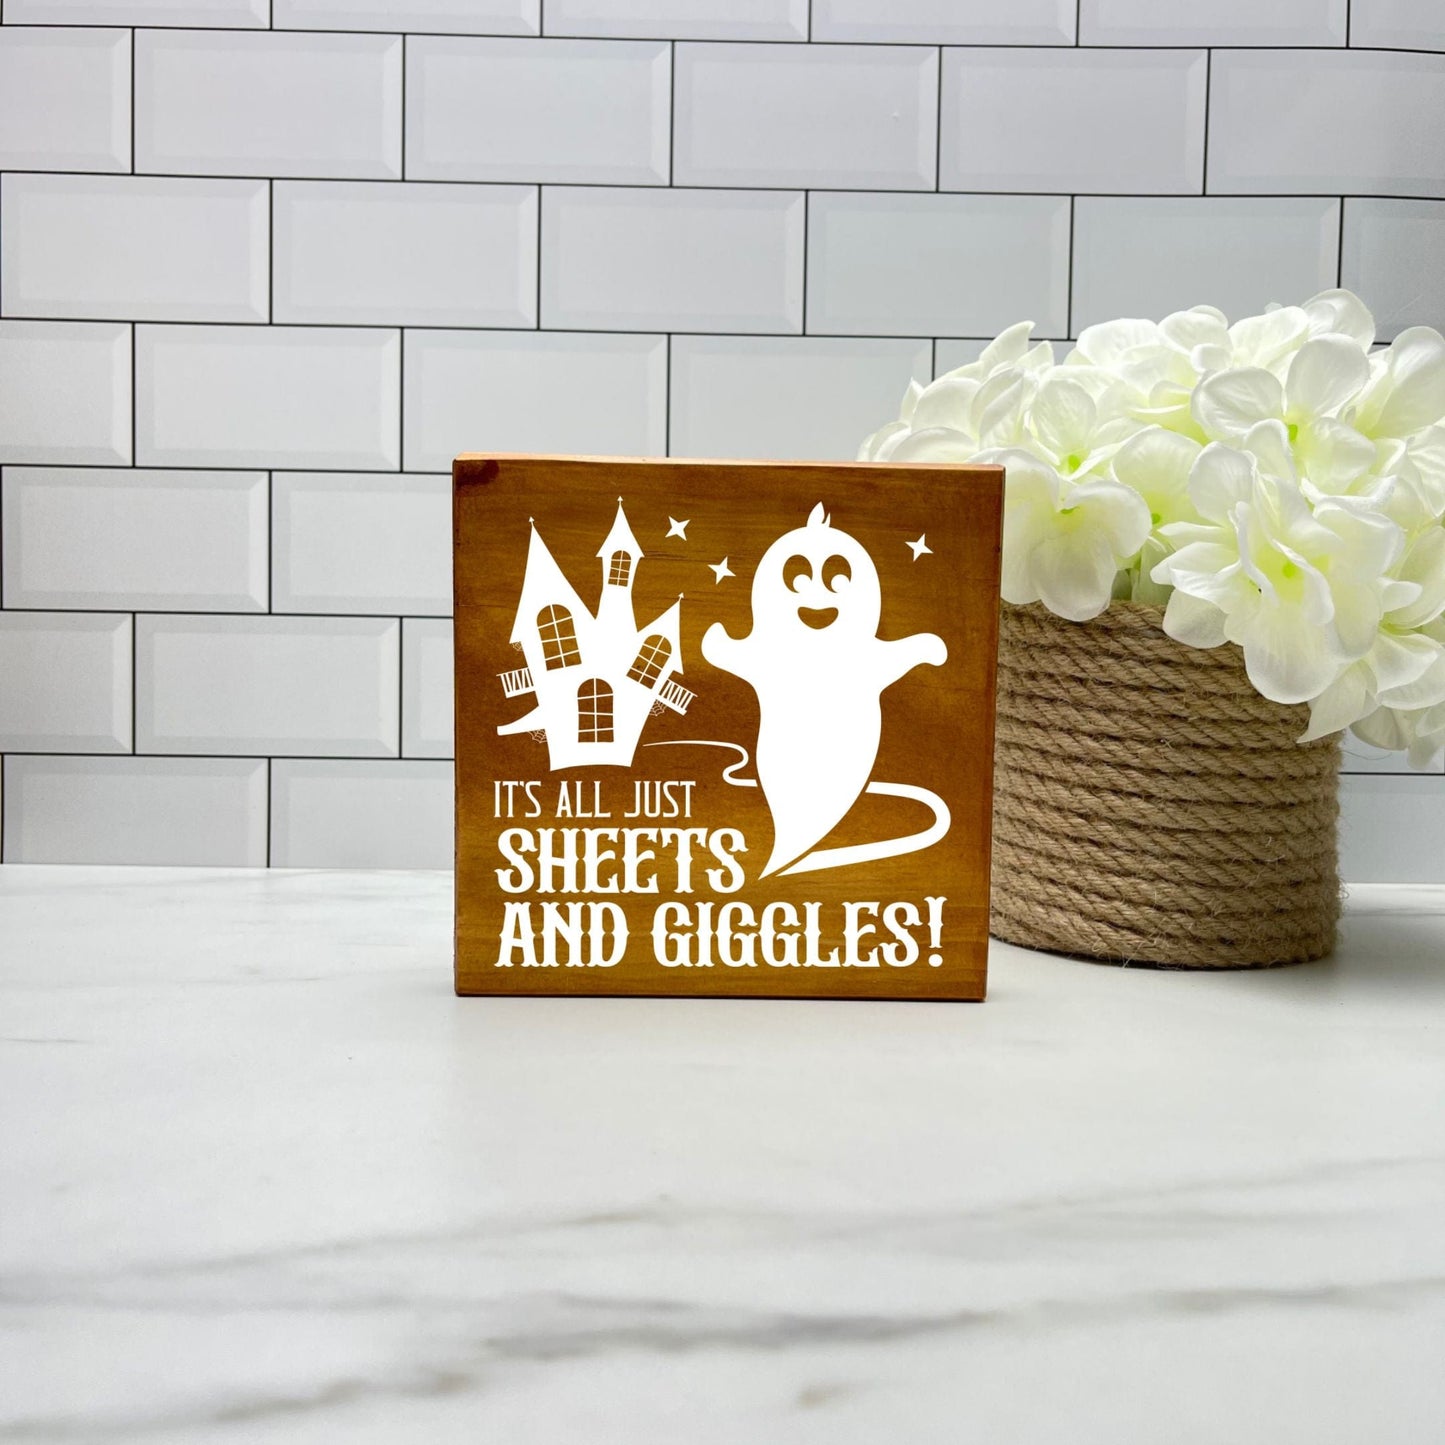 It's just sheets and giggles Wood Sign, Halloween Wood Sign, Halloween Home Decor, Spooky Decor